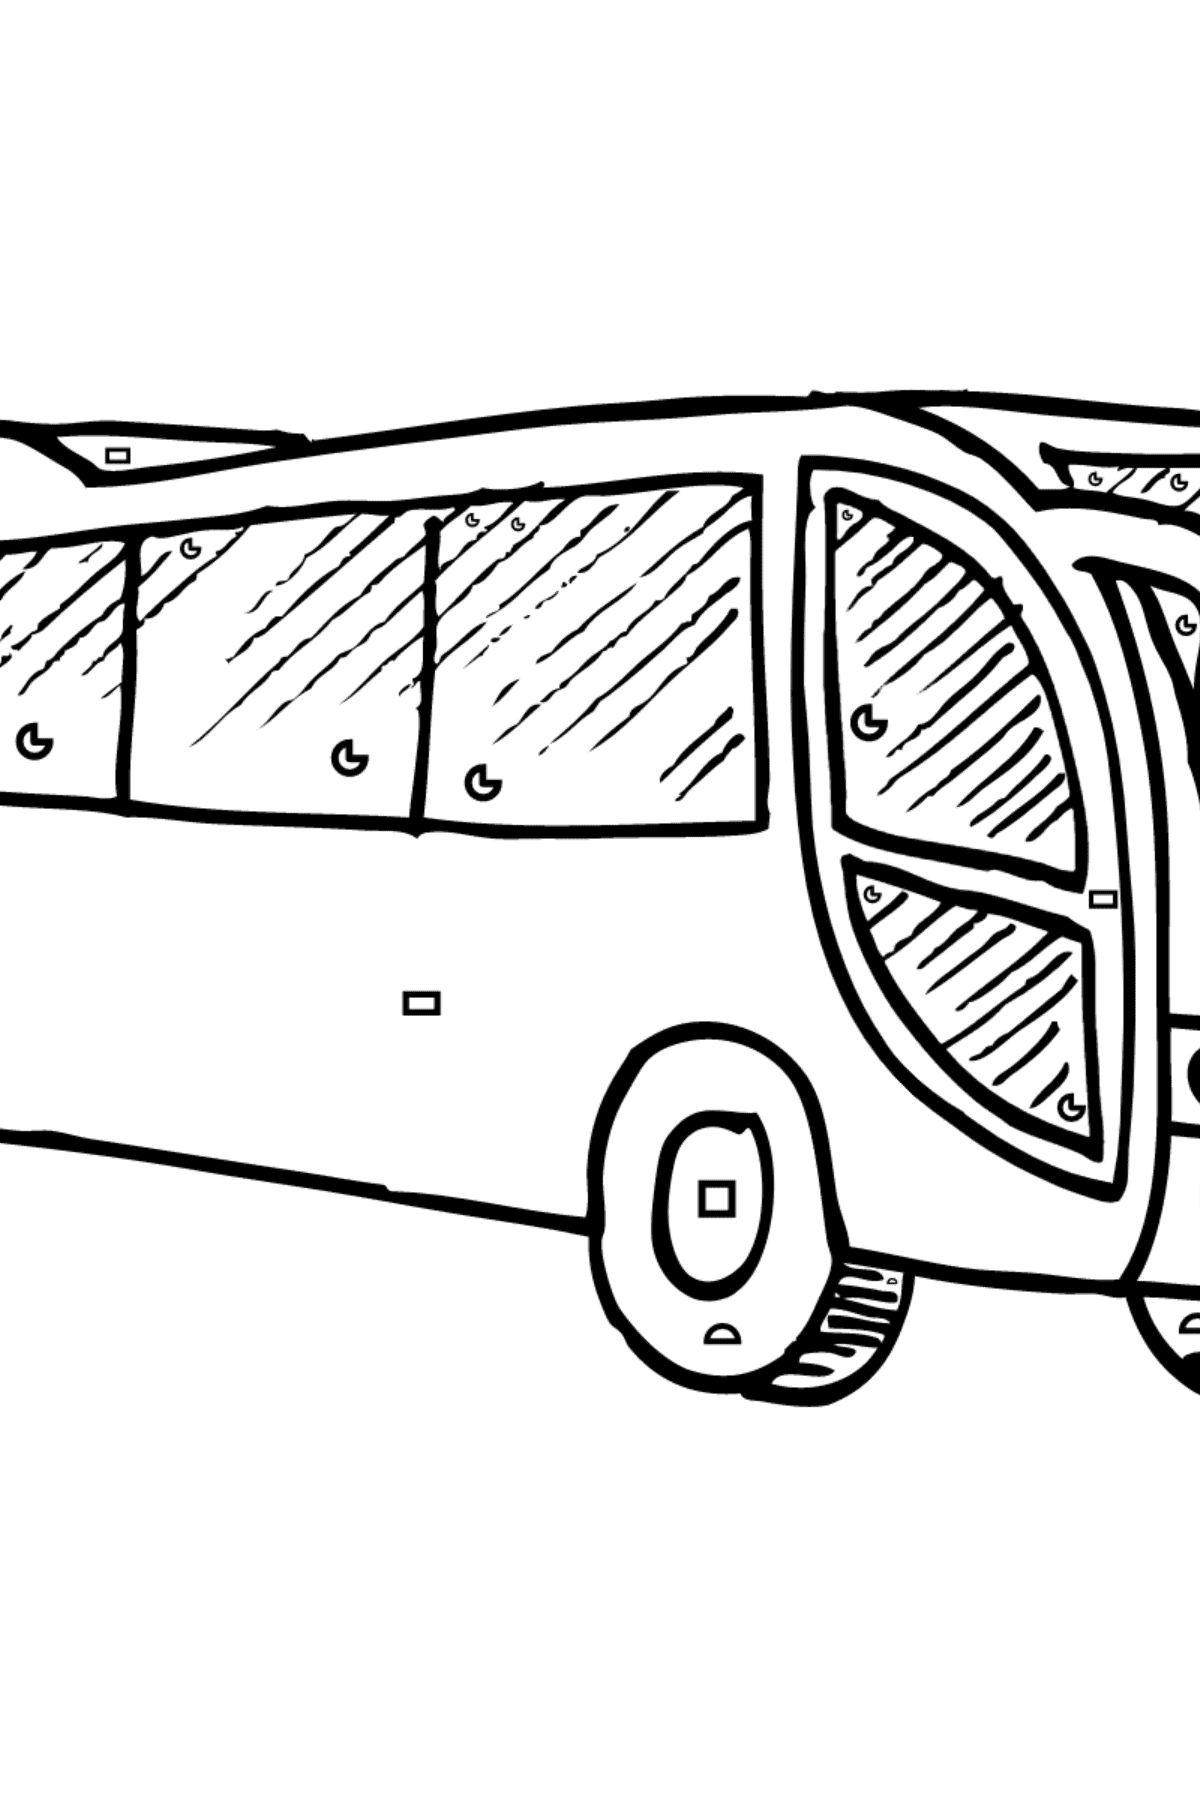 Coloring Page - A Bus is Having Rest - Coloring by Geometric Shapes for Children